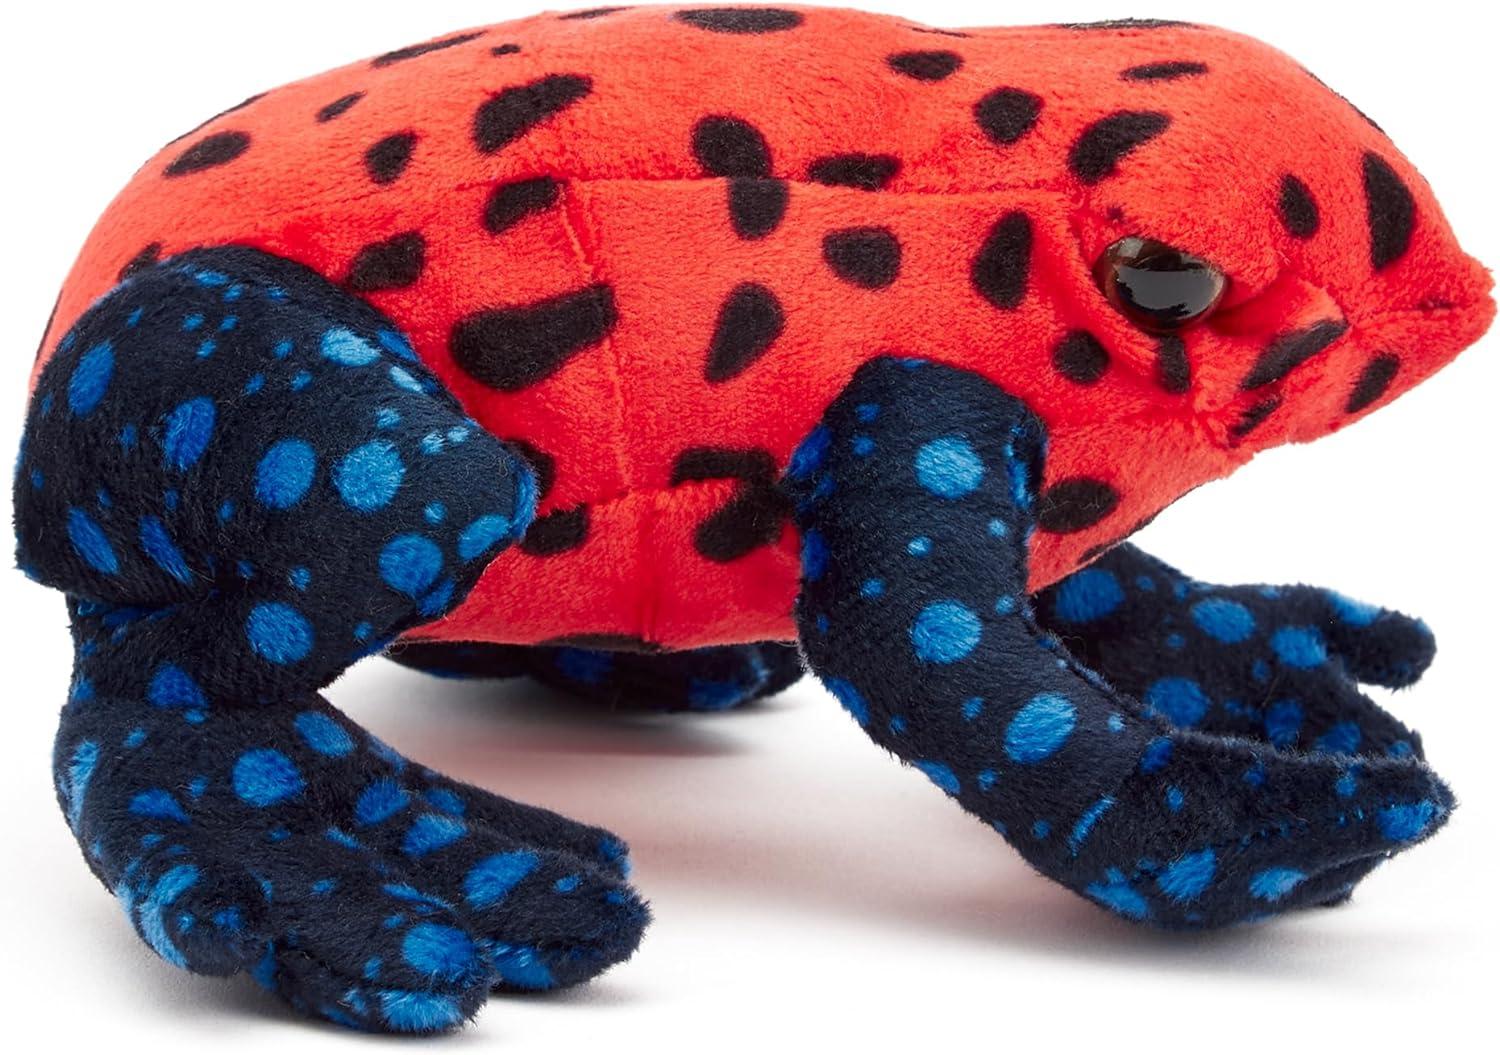 Zappi Co 100% Recycled Plush Poison Dart Frog Strawberry Red/Black Toy  (15cm Width) Stuffed Soft Cuddly Eco Friendly animals Collection For New Born  Child First kid Poison Dart Frog Strawberry Red /